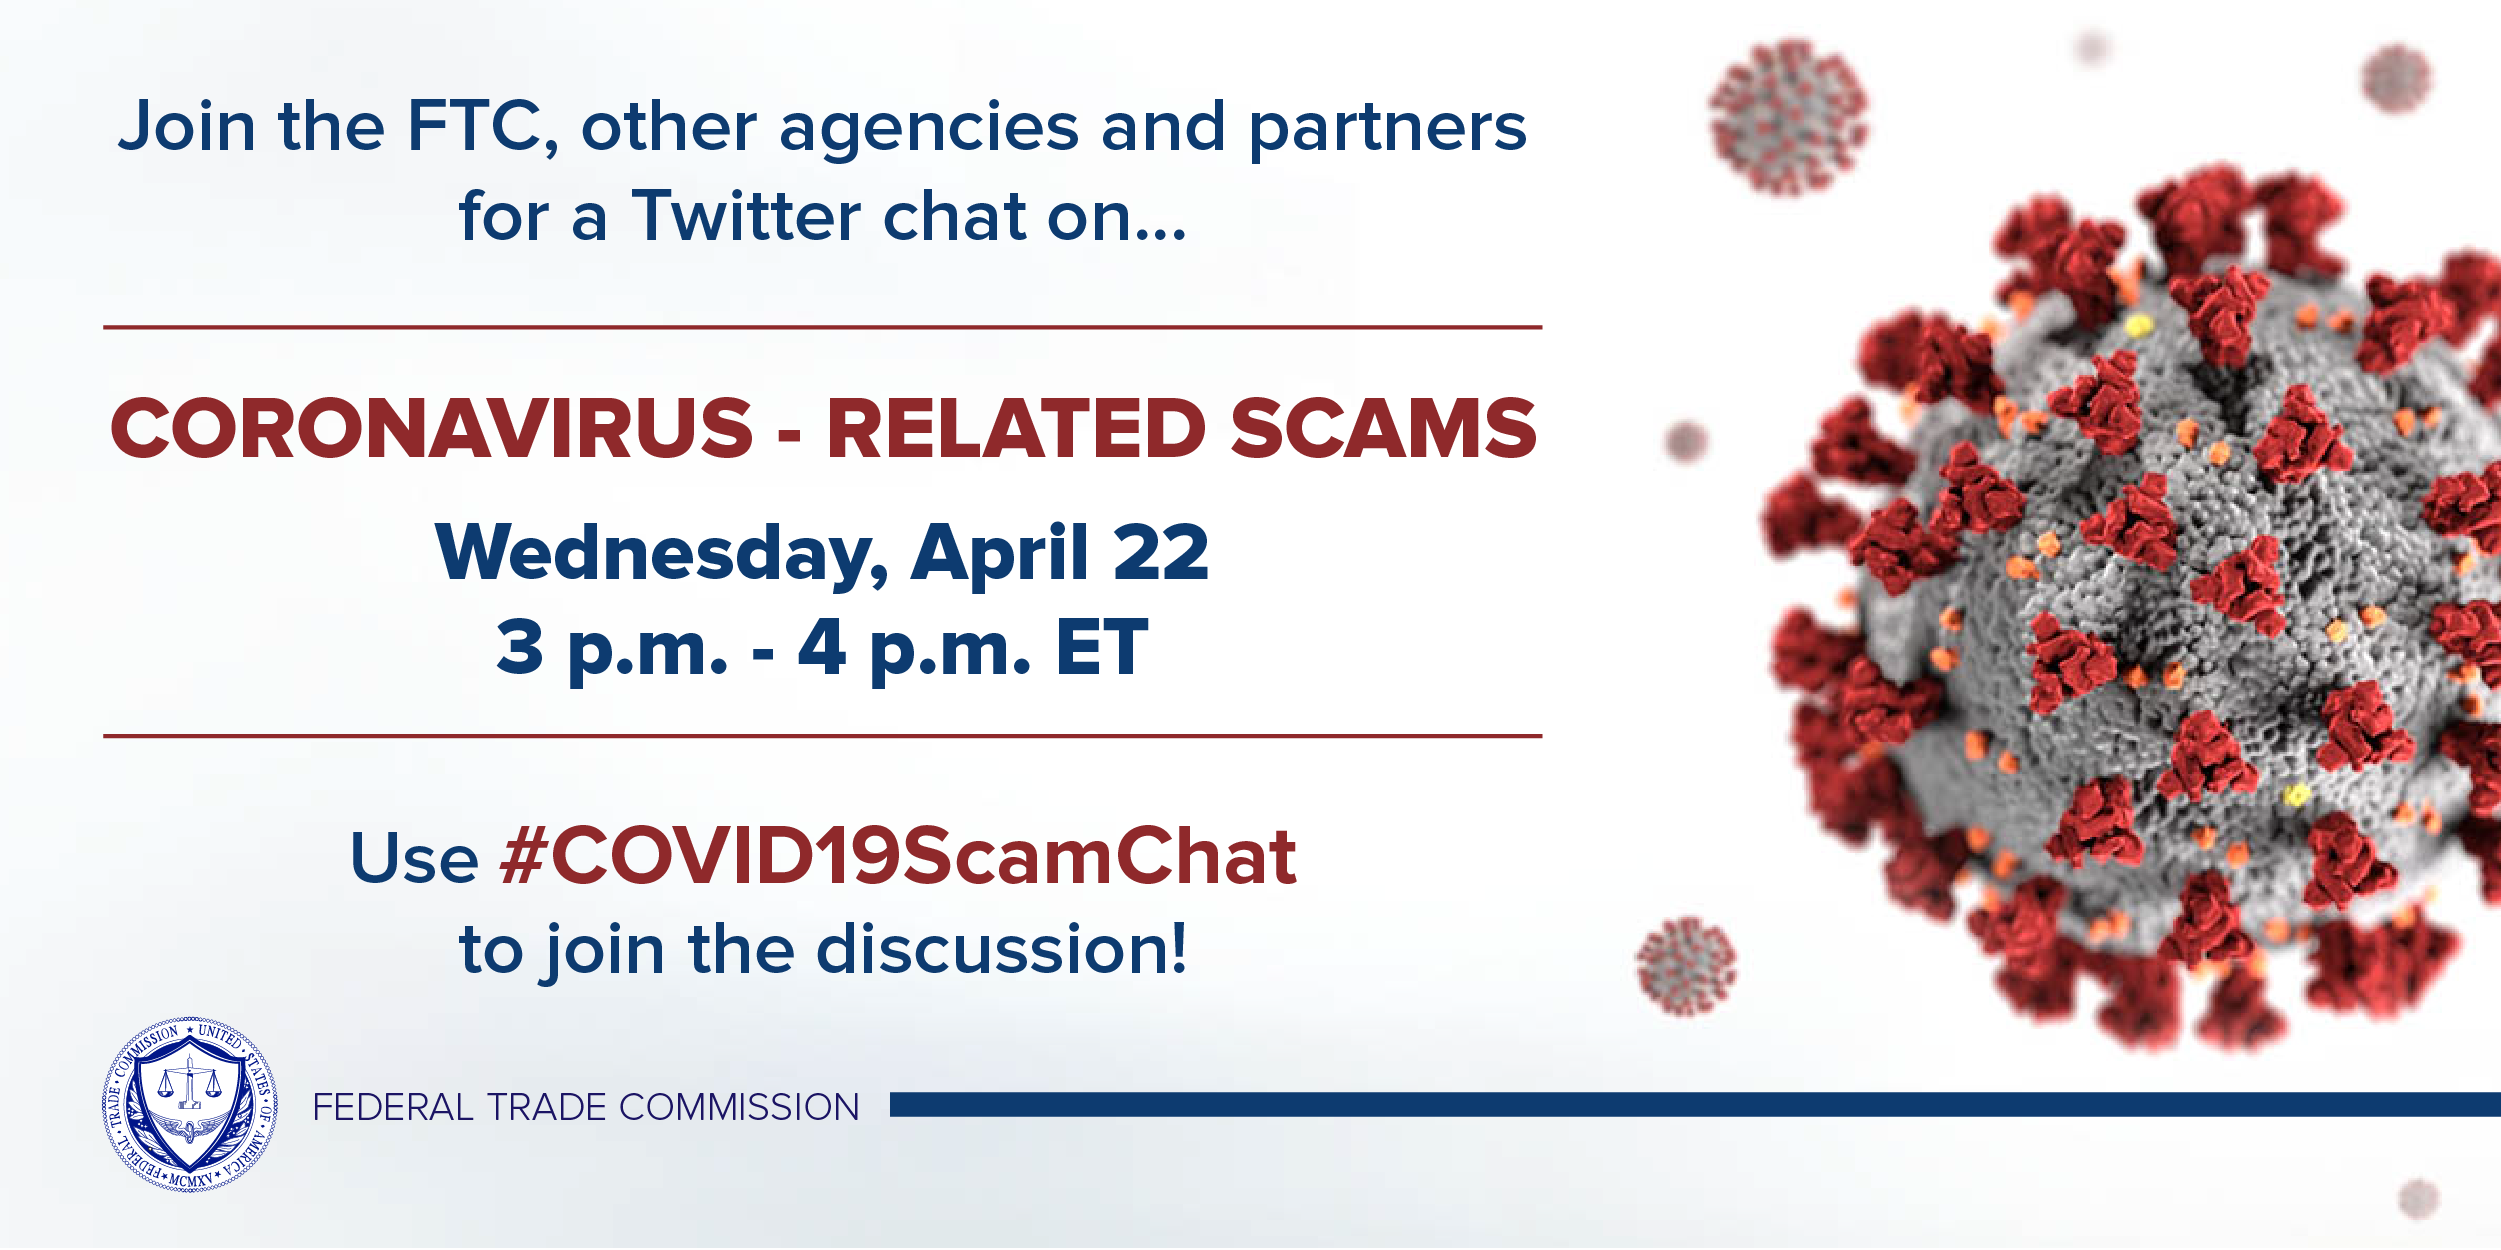 FTC Live Twitter Chat about Coronavirus Scams